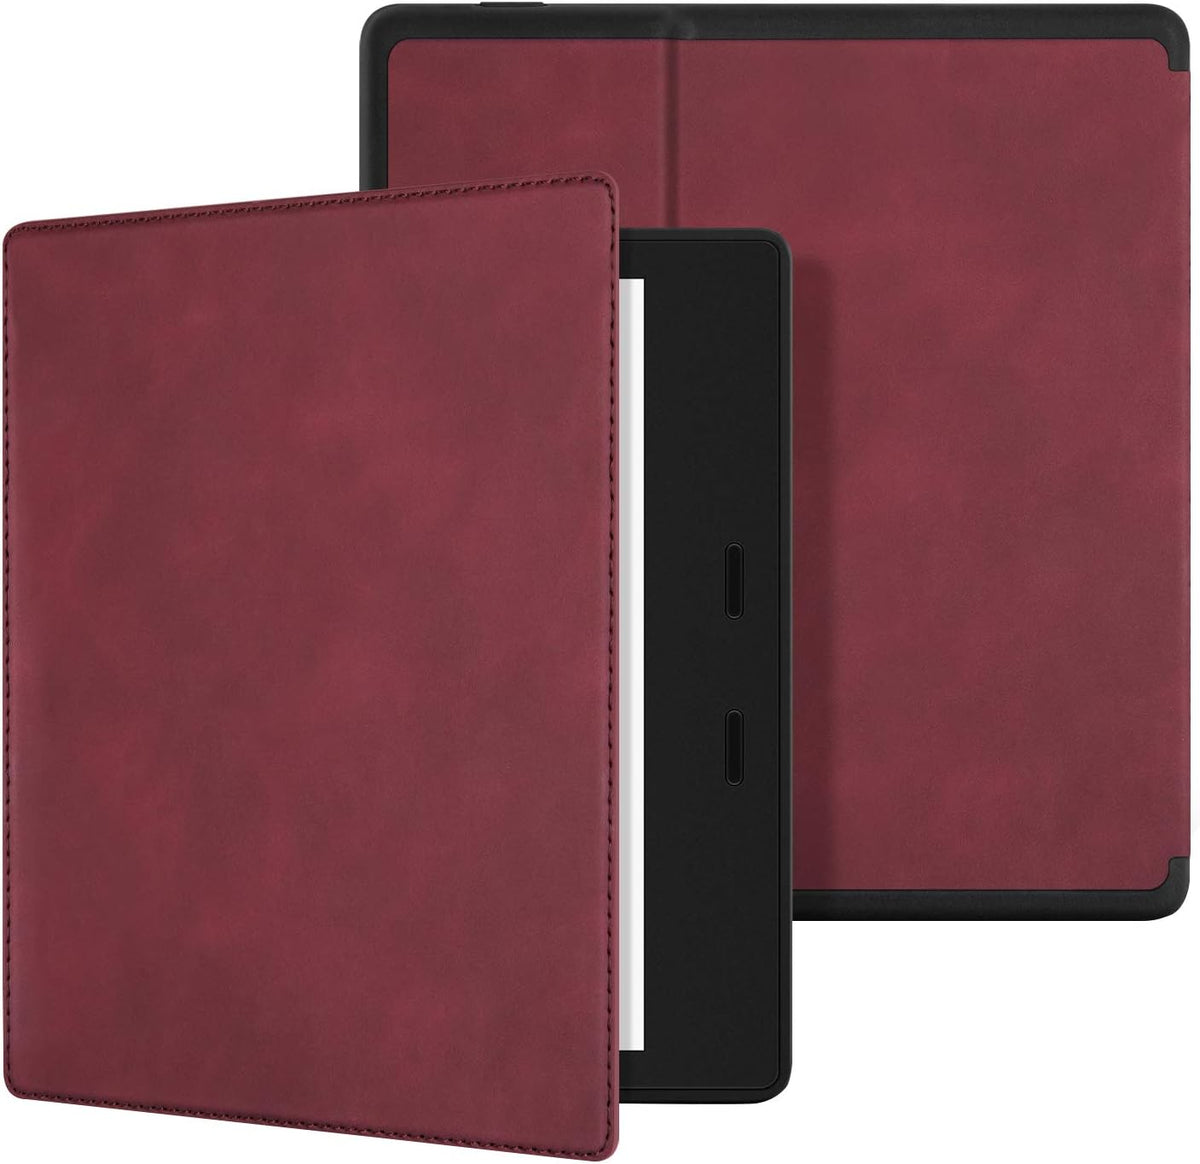 Skin Touch Feeling Case for All-New Kindle Oasis(10Th Gen, 2019 Release & 9Th Gen, 2017 Release),With Auto Wake/Sleep,New Waterproof 7''Kindle Oasis Cover,Soft Shell Series KO the Red Wine